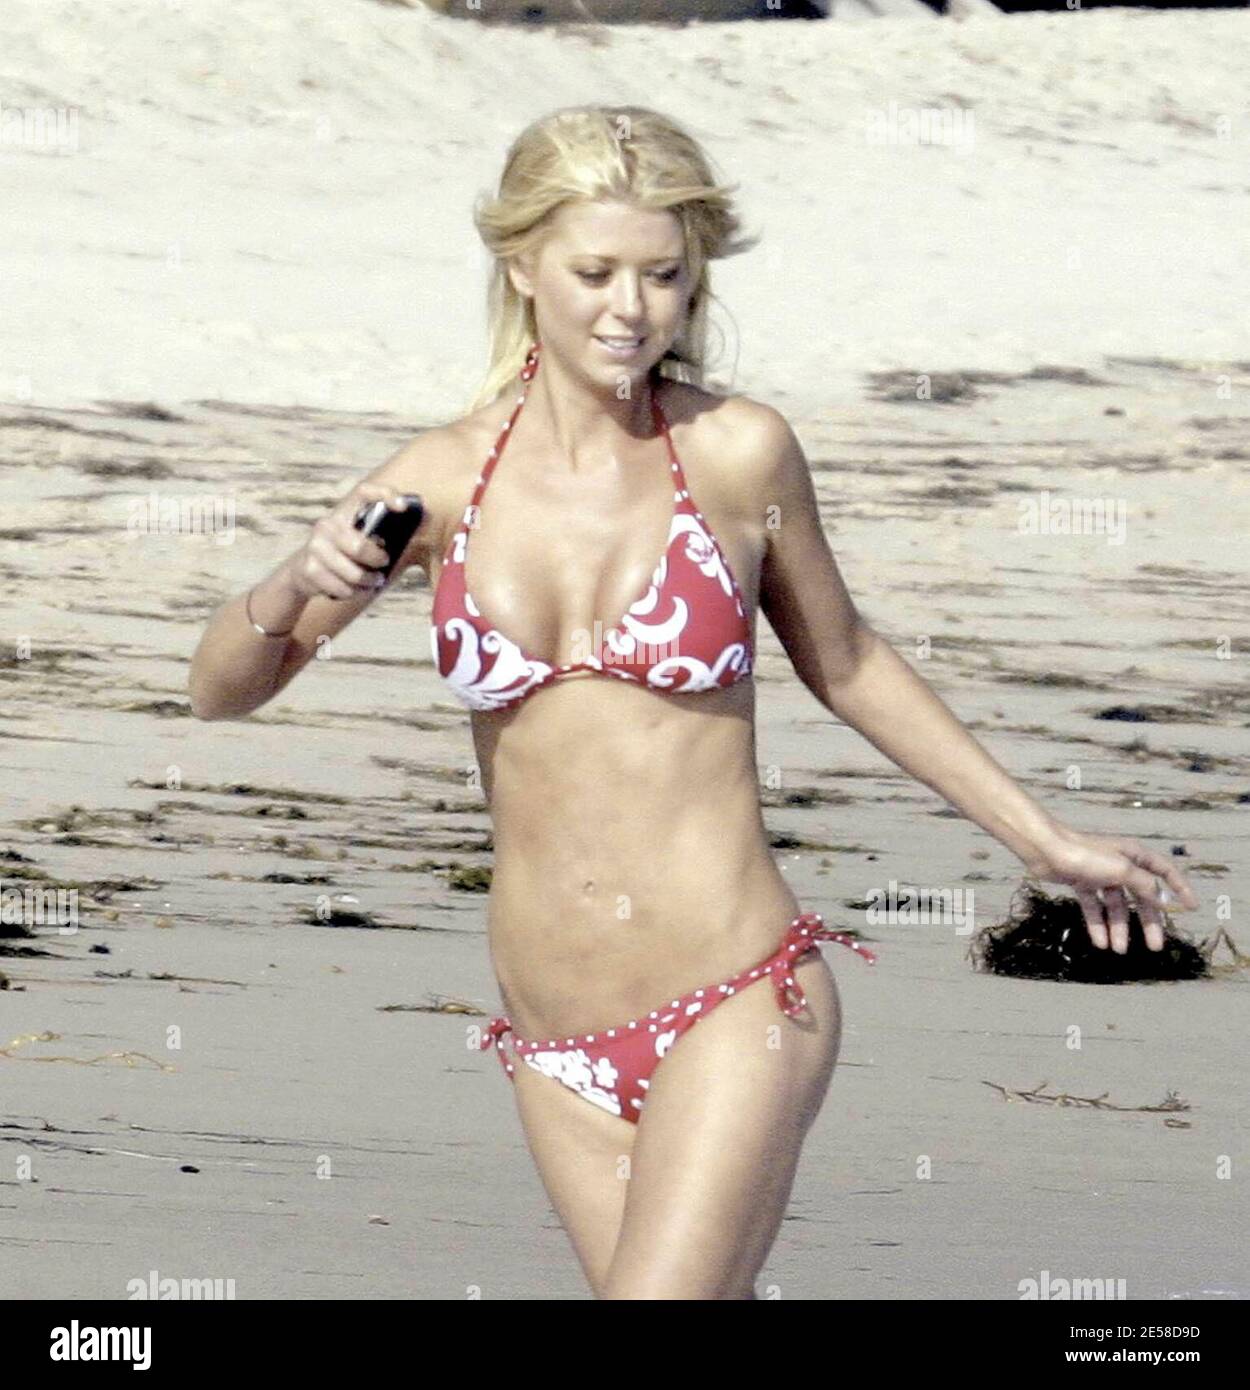 atomair zoom Assert Tara Reid takes to the beach for some fun and games sporting a red and  white bikini. Even though the actress has undergone corrective procedures  for botched plastic surgery, Reid still shows